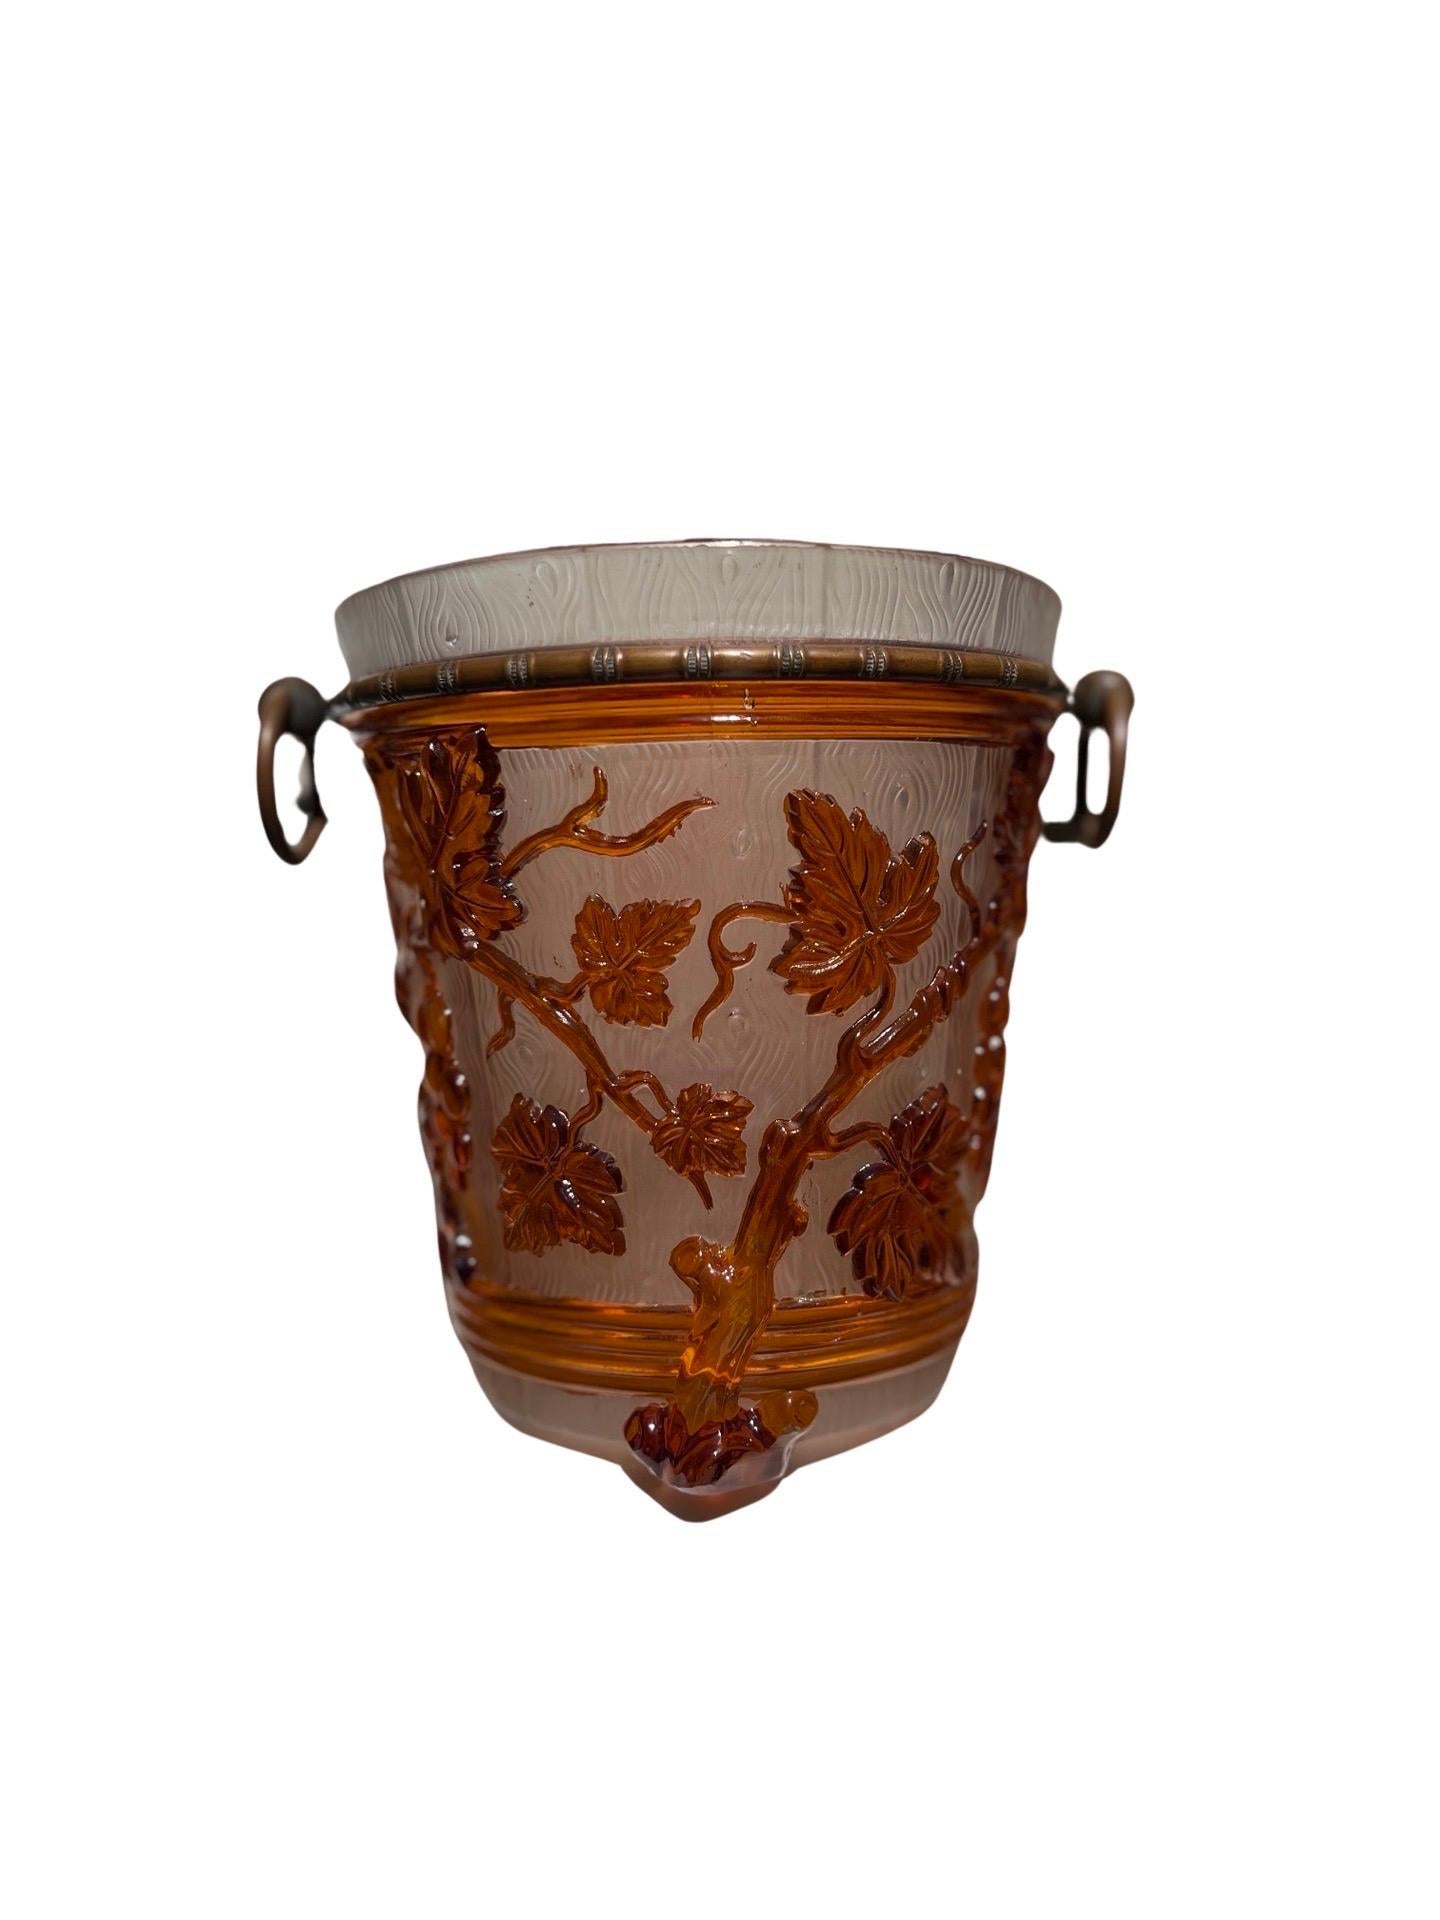 Baccarat, circa 1860.

A 19th Century Baccarat Ormolu Mounted Grape Vine Pattern Ice or Champagne Bucket made of pressed French glass showcasing a beautiful grape leaf and vine motif to exterior and a faux bois textured surface. The interior is